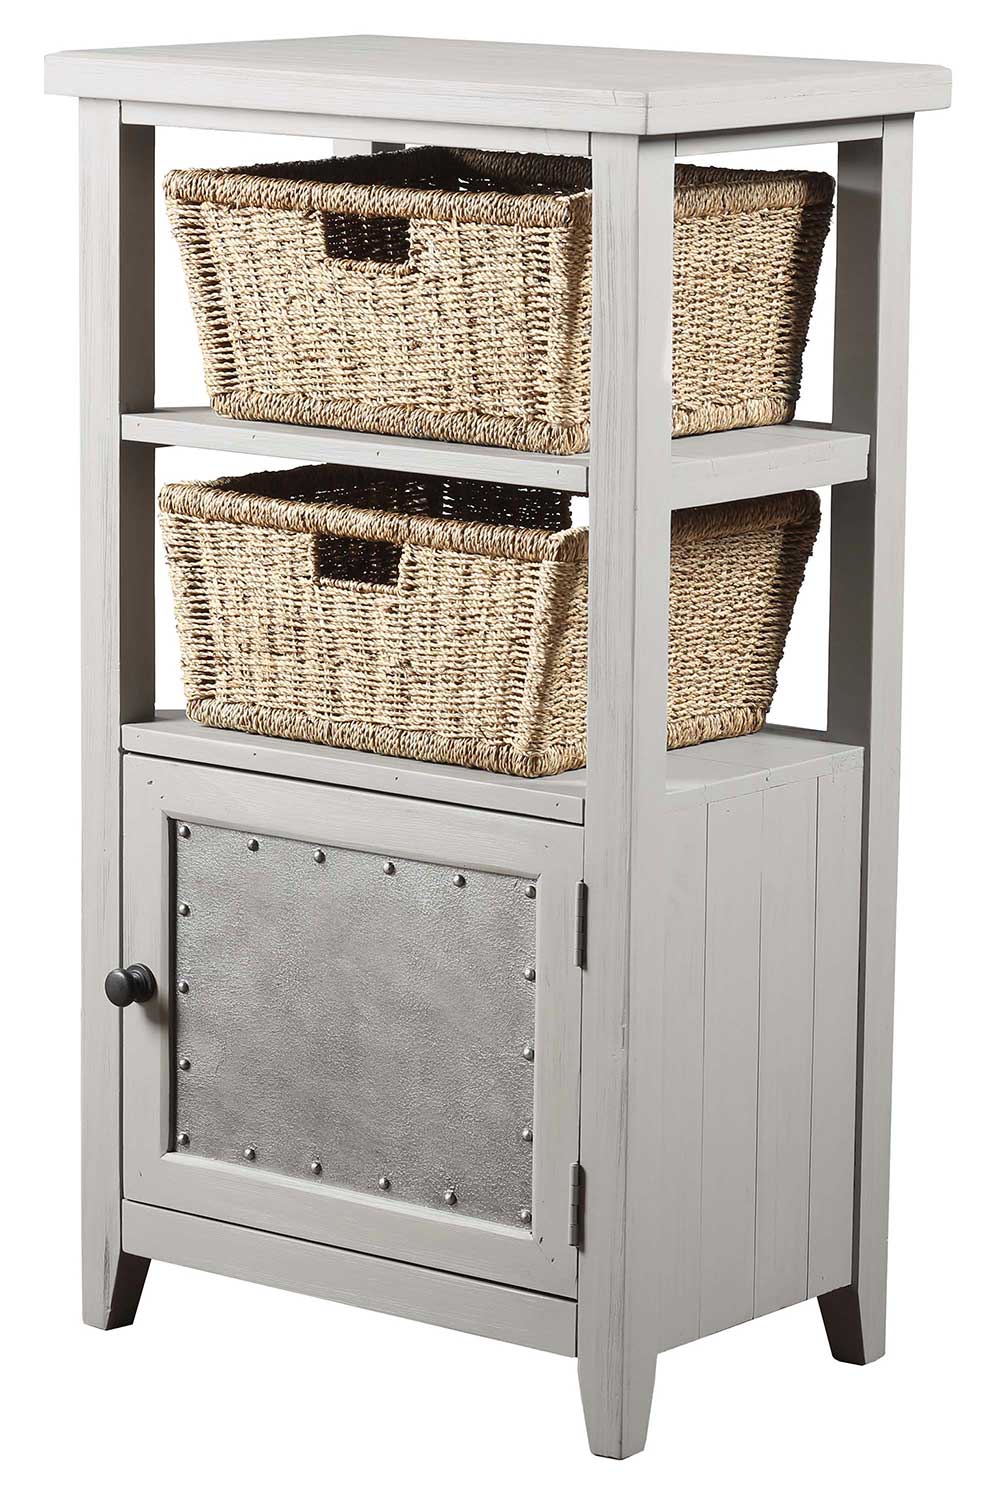 Hillsdale Tuscan Retreat Basket Stand with 2-Basket - Taupe